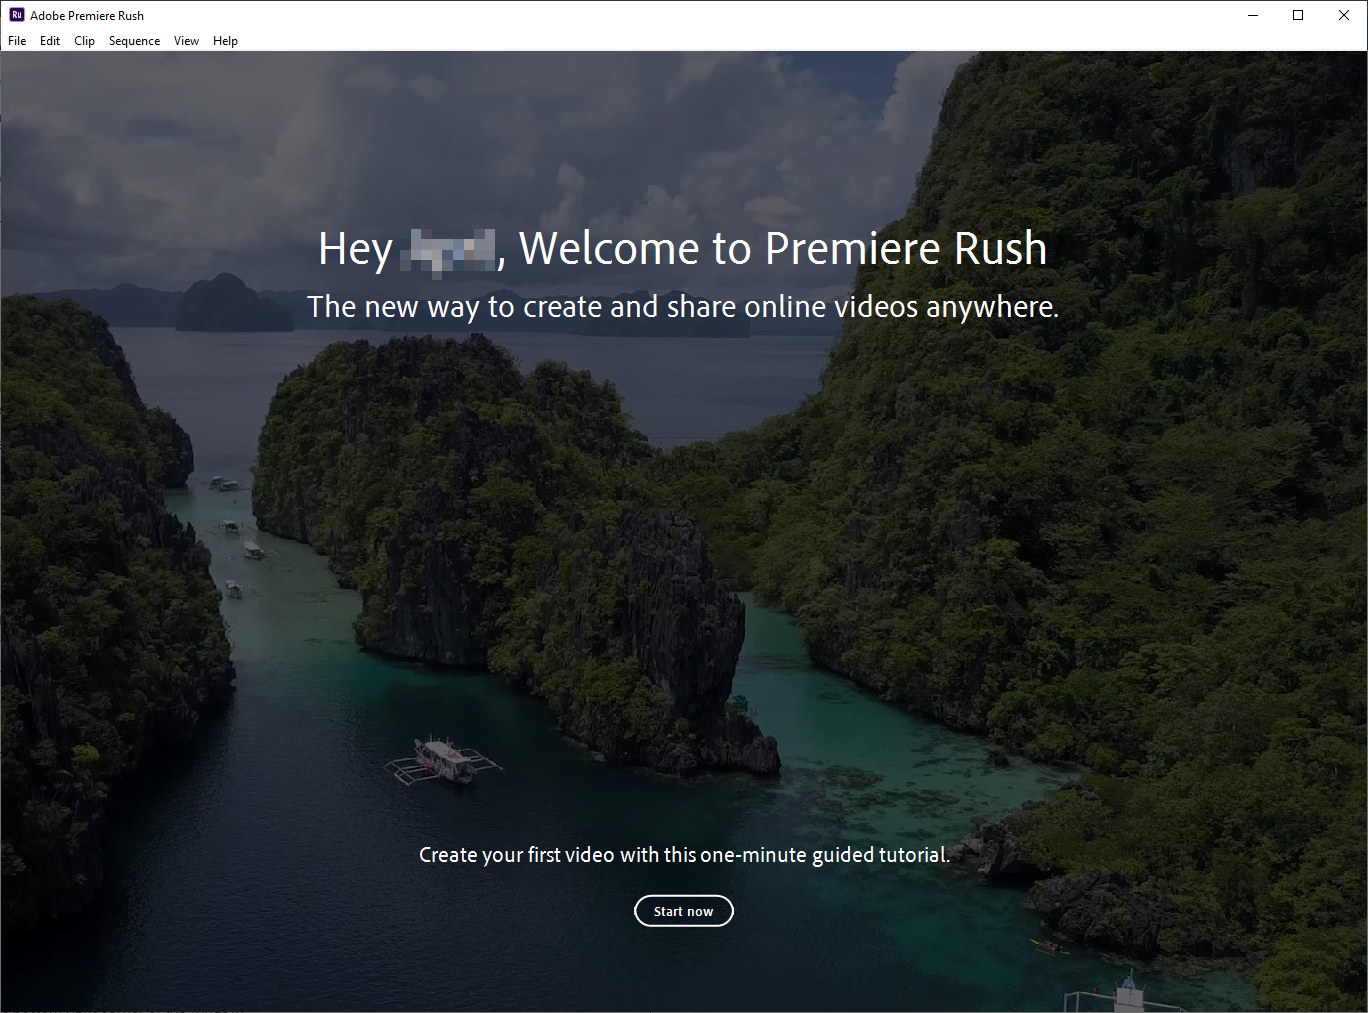 Window that welcomes the user to Premiere Rush, with a button at the bottom that starts the Premiere Rush tutorial.